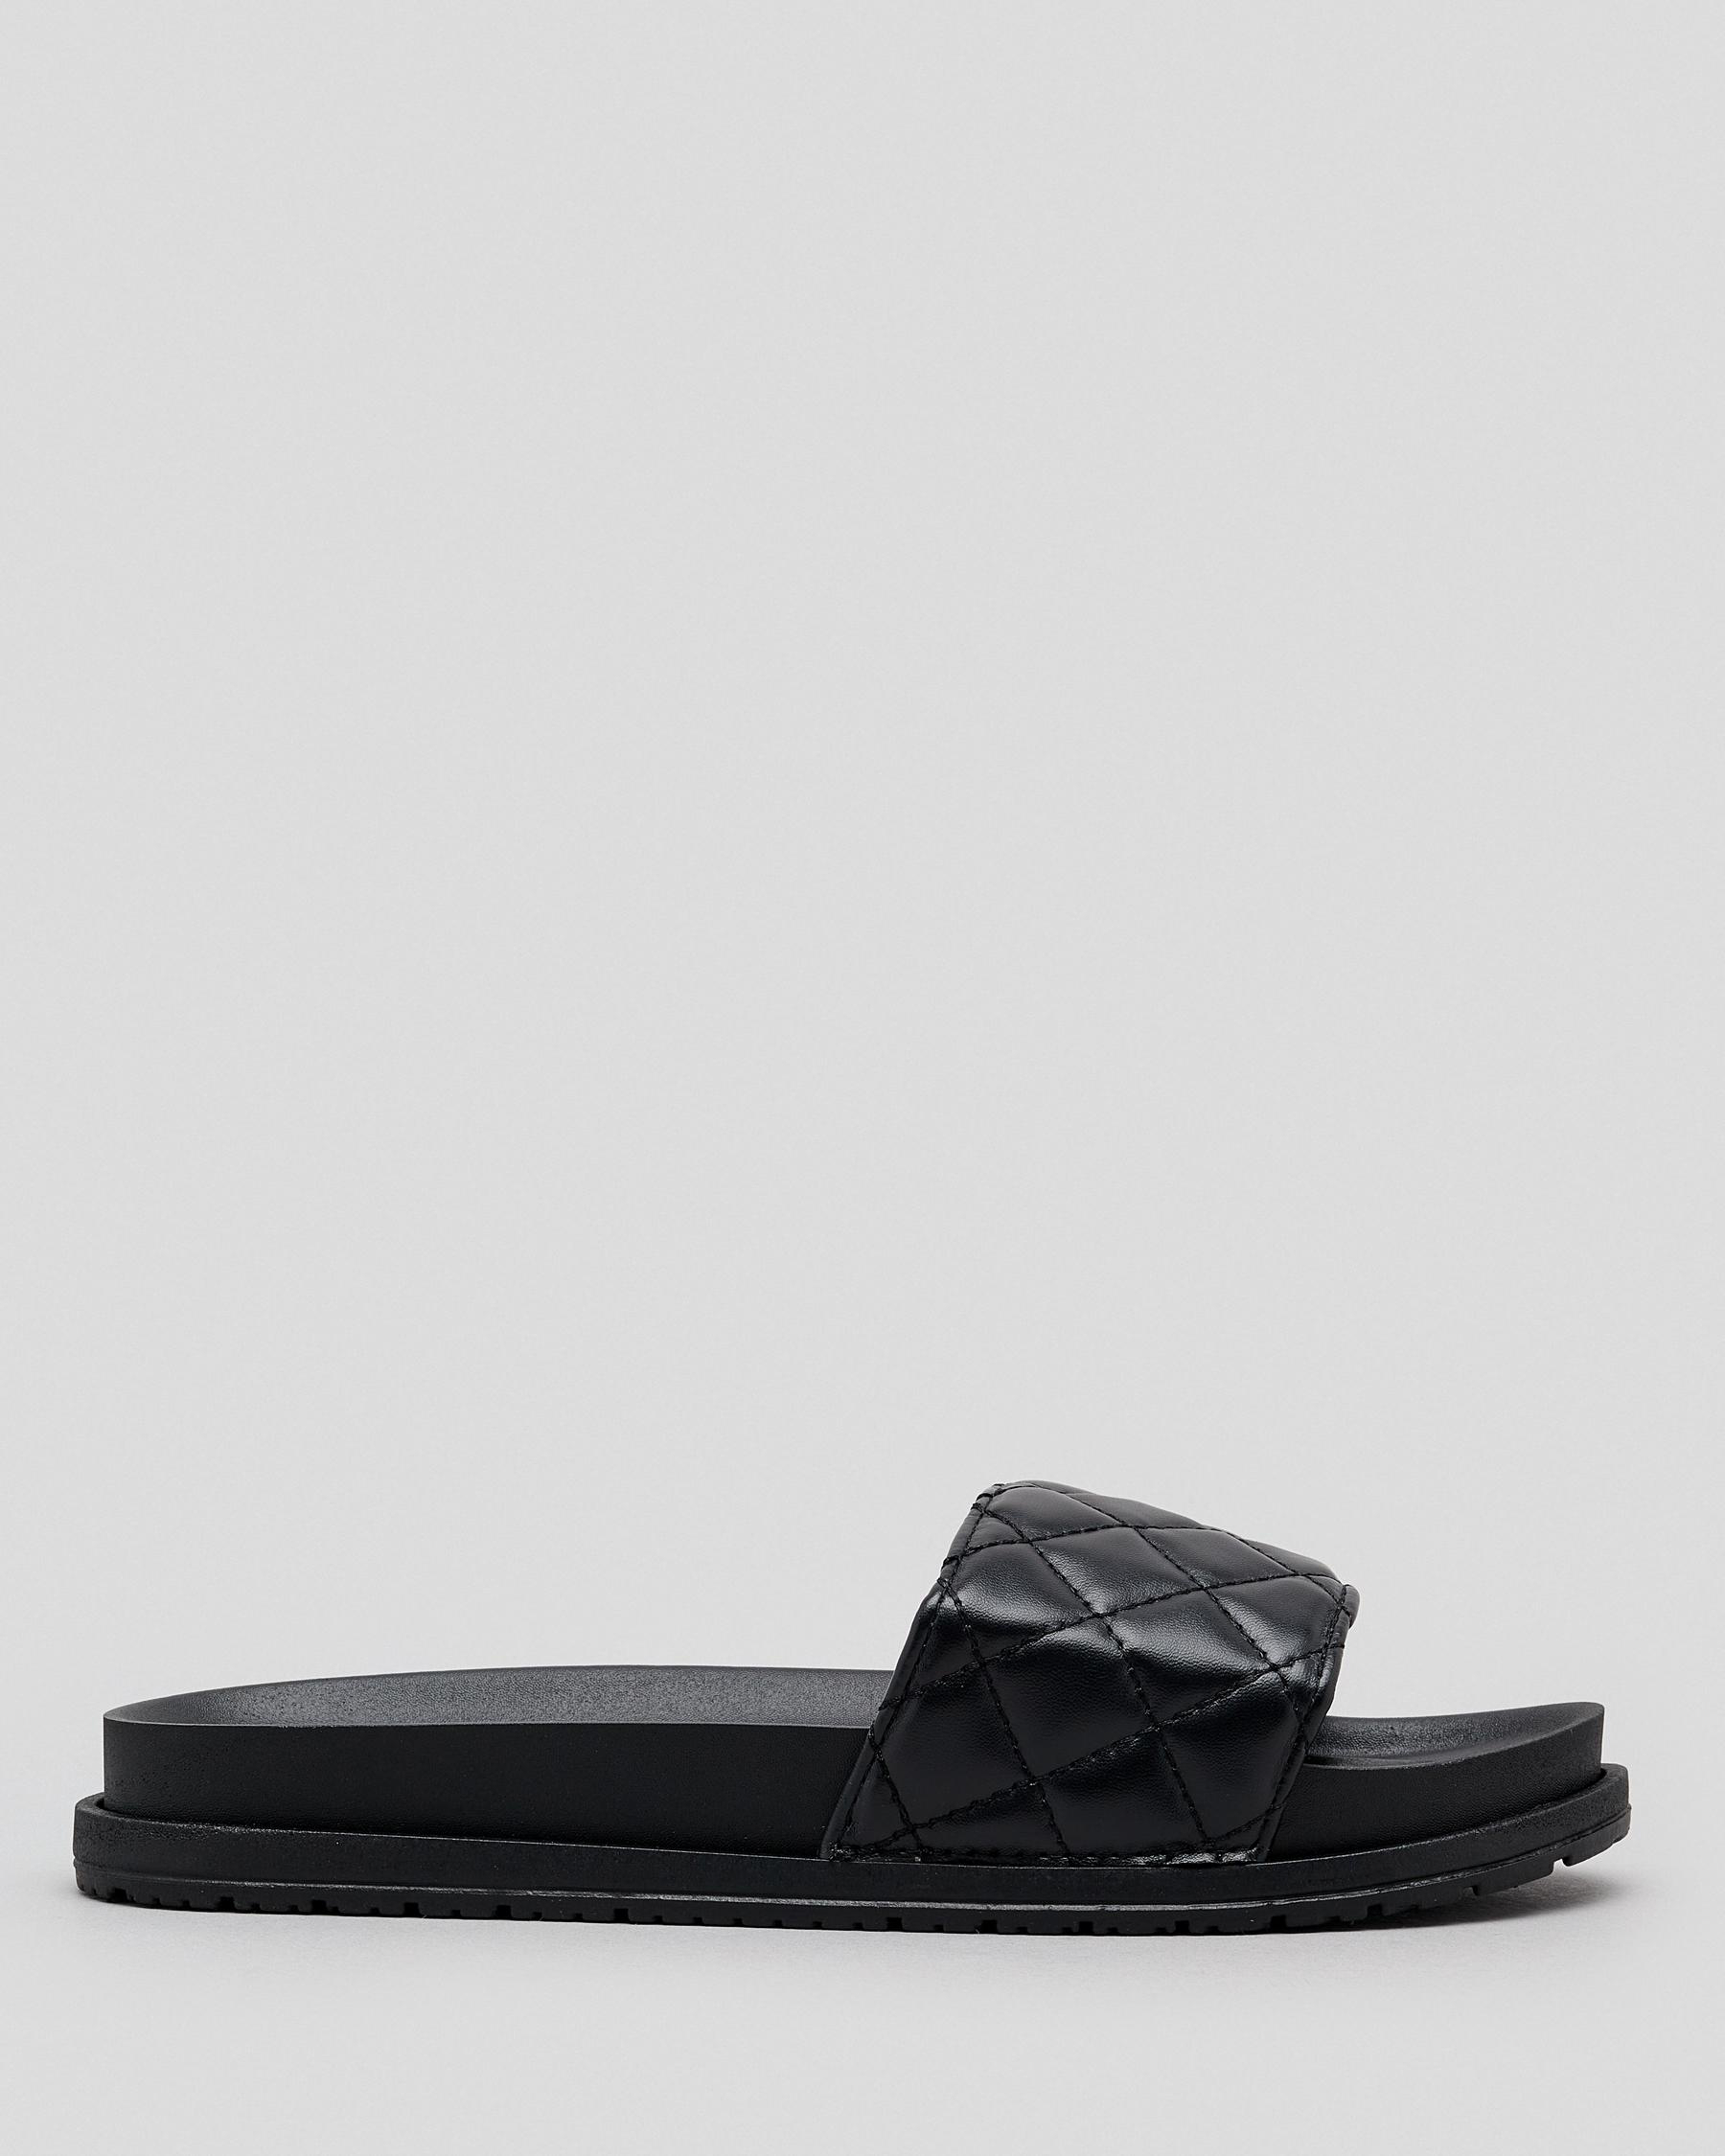 Ava And Ever Cressida Slide Sandals In Black - Fast Shipping & Easy ...